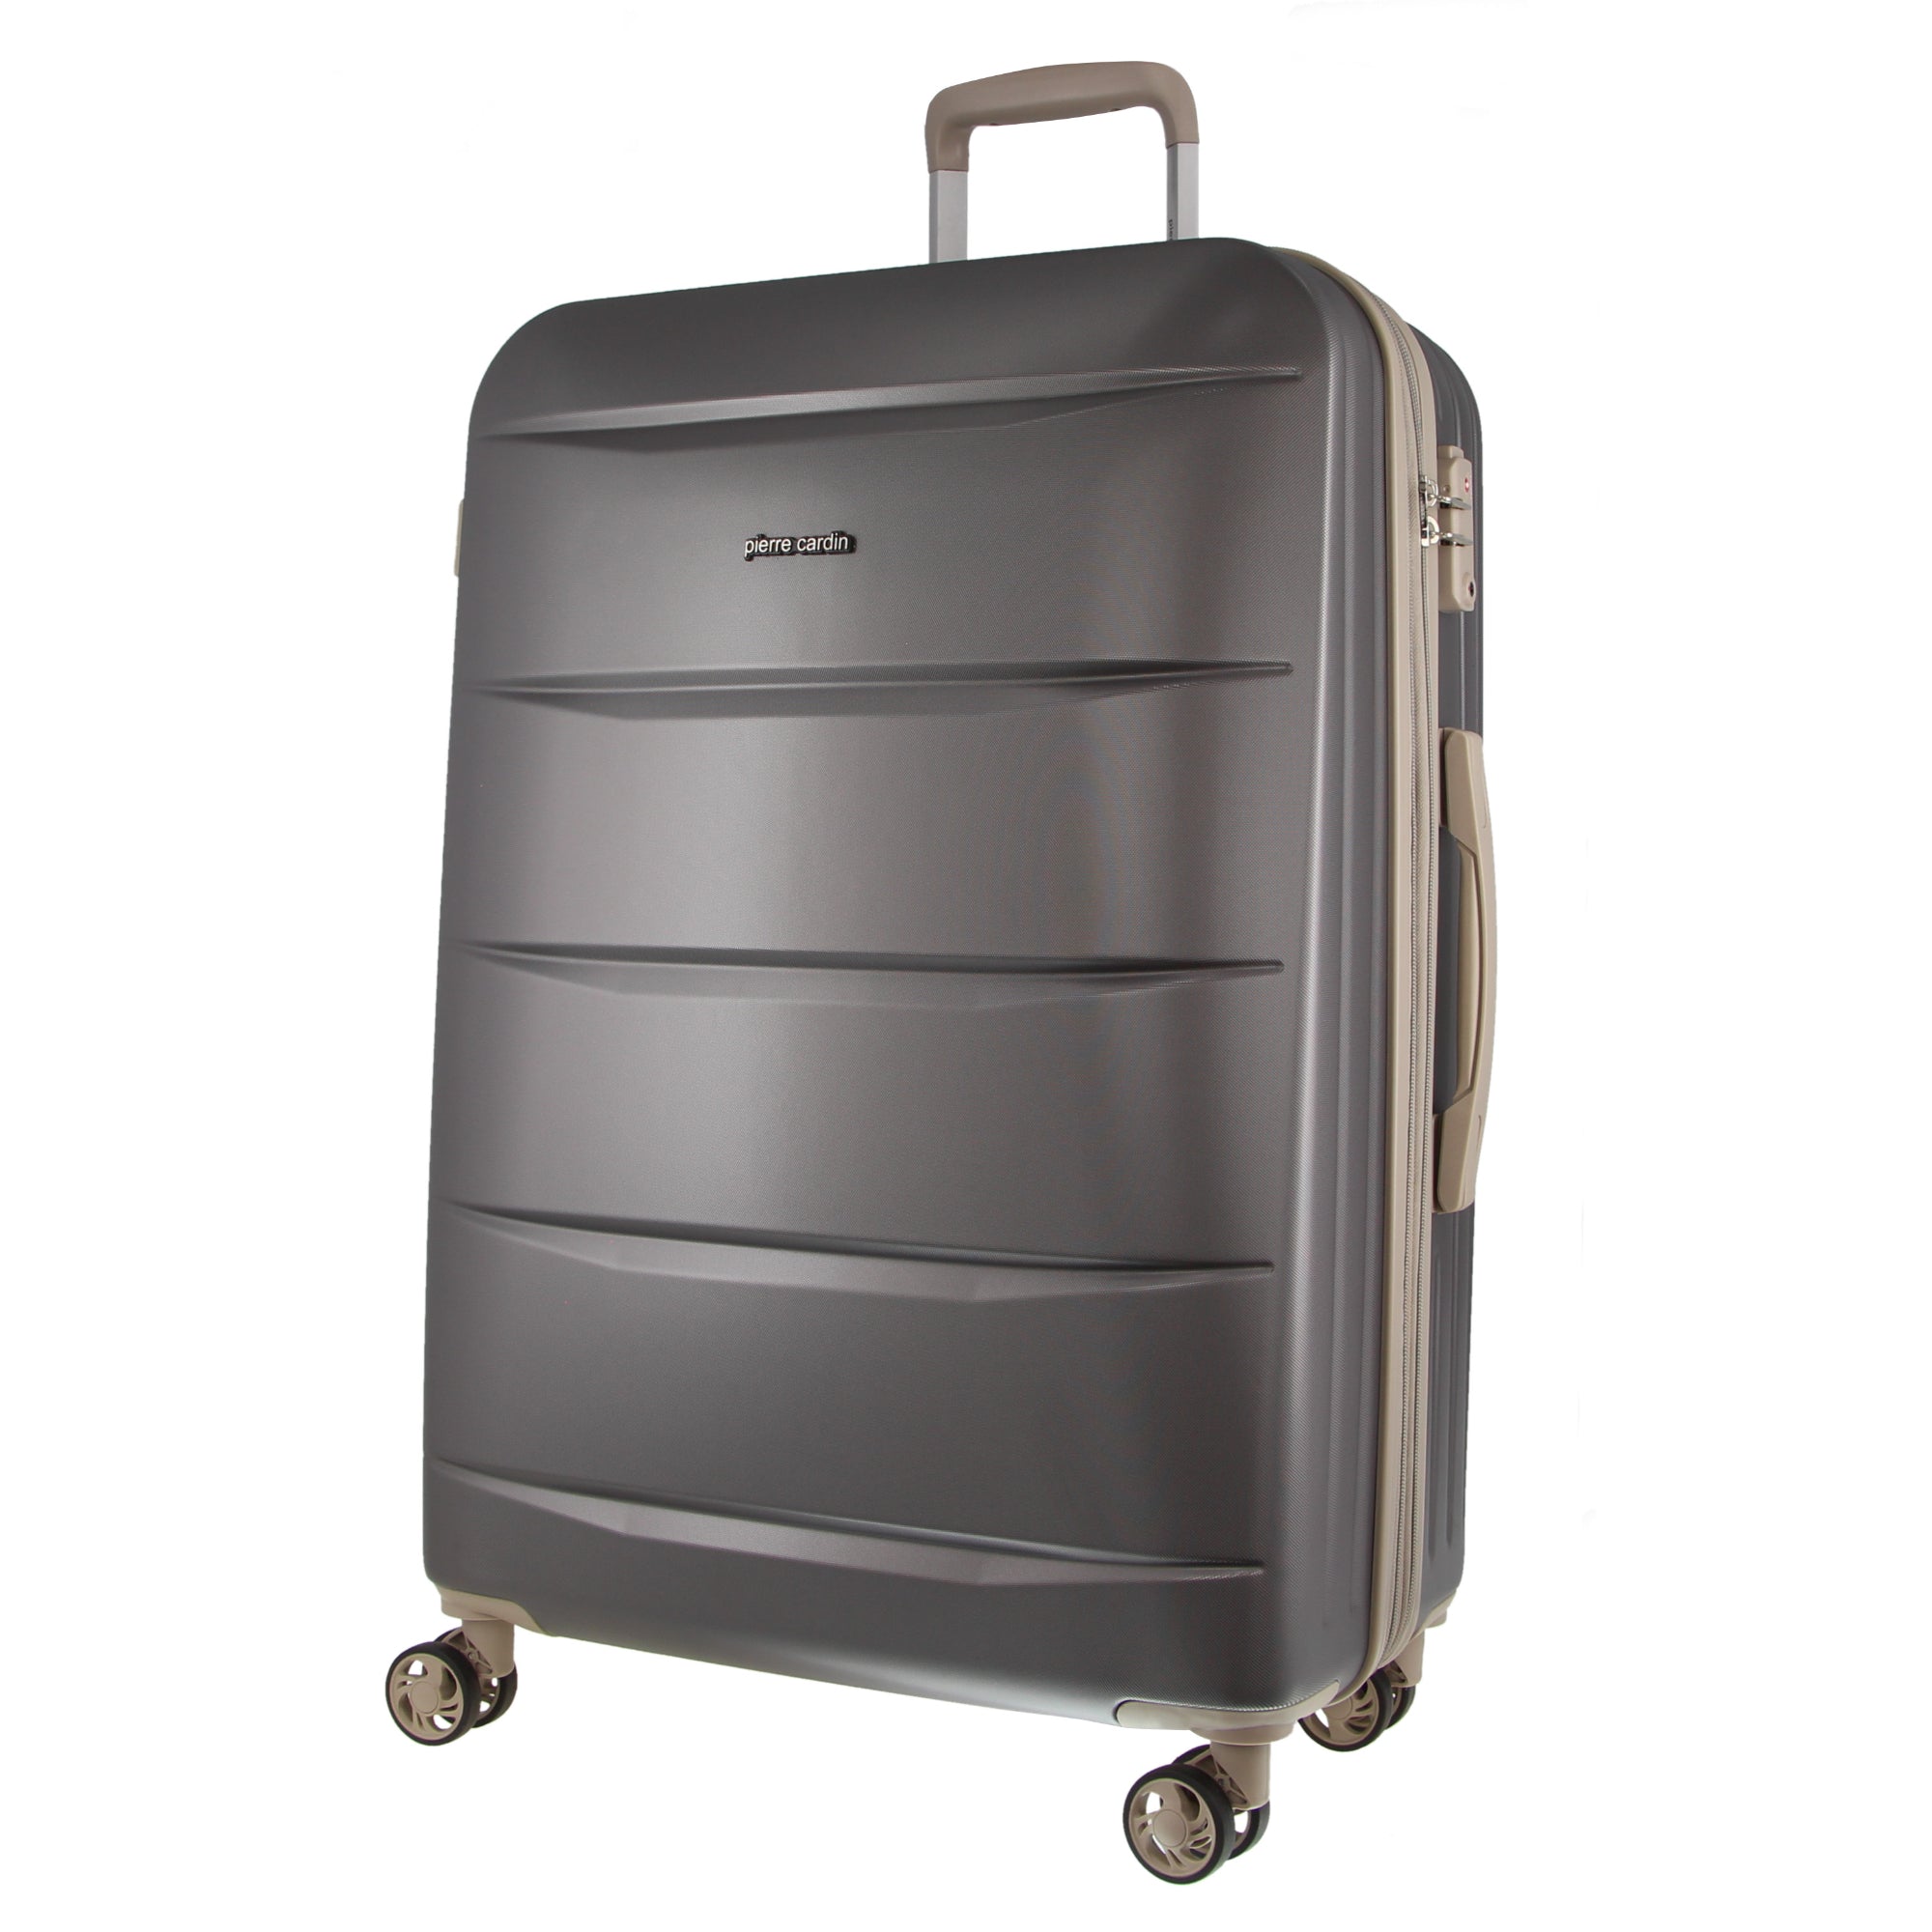 Pierre Cardin 80cm LARGE Hard-Shell Suitcase in Graphite